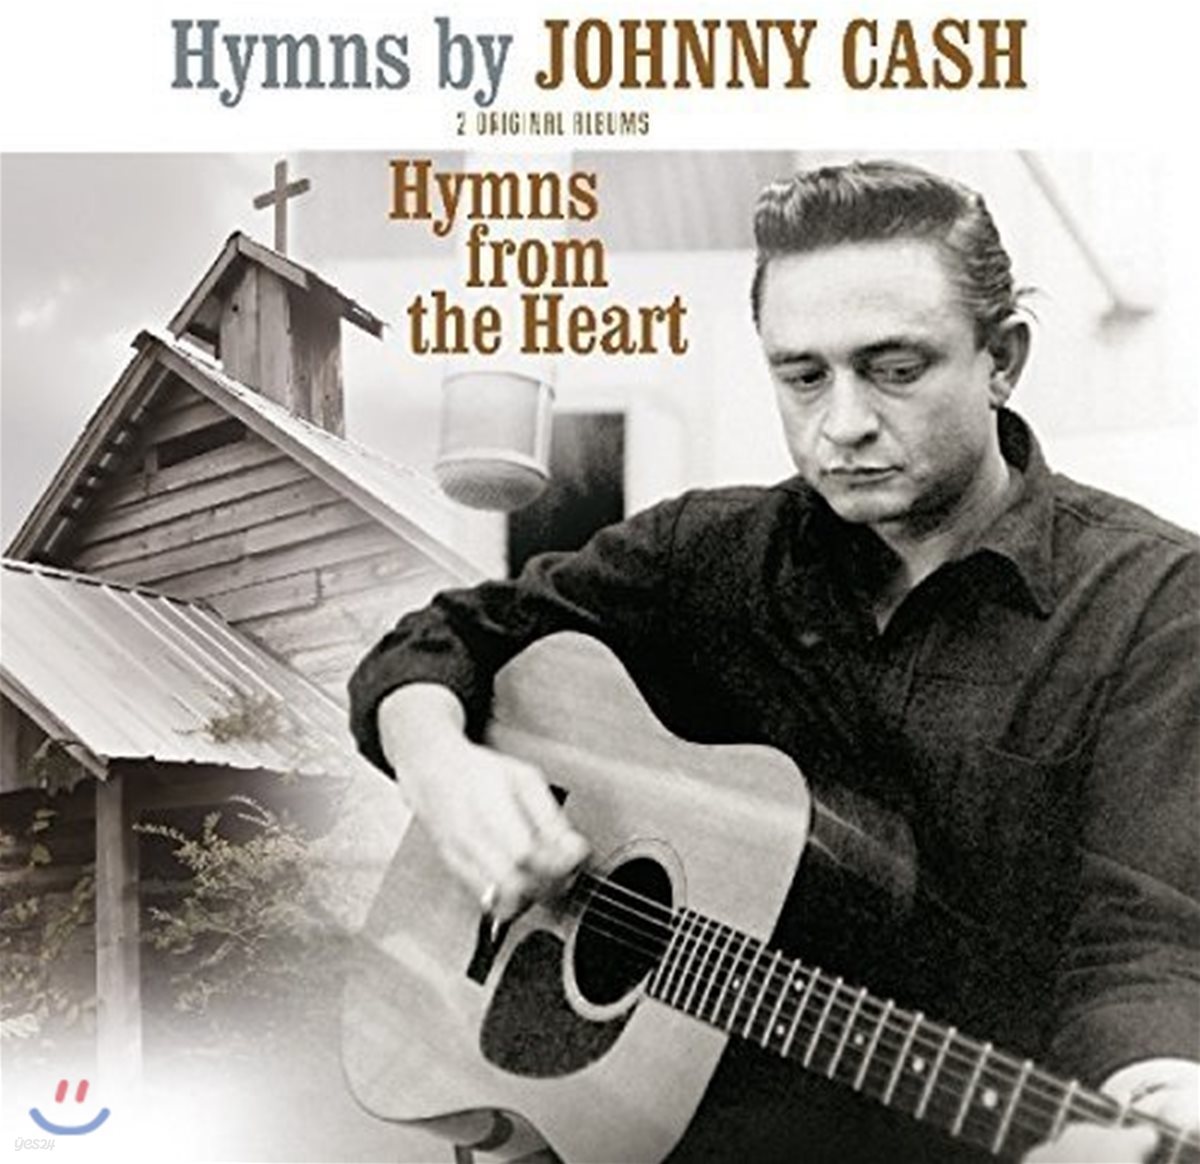 Johnny Cash (조니 캐쉬) - Hymns / Hymns From The Heart  [LP]